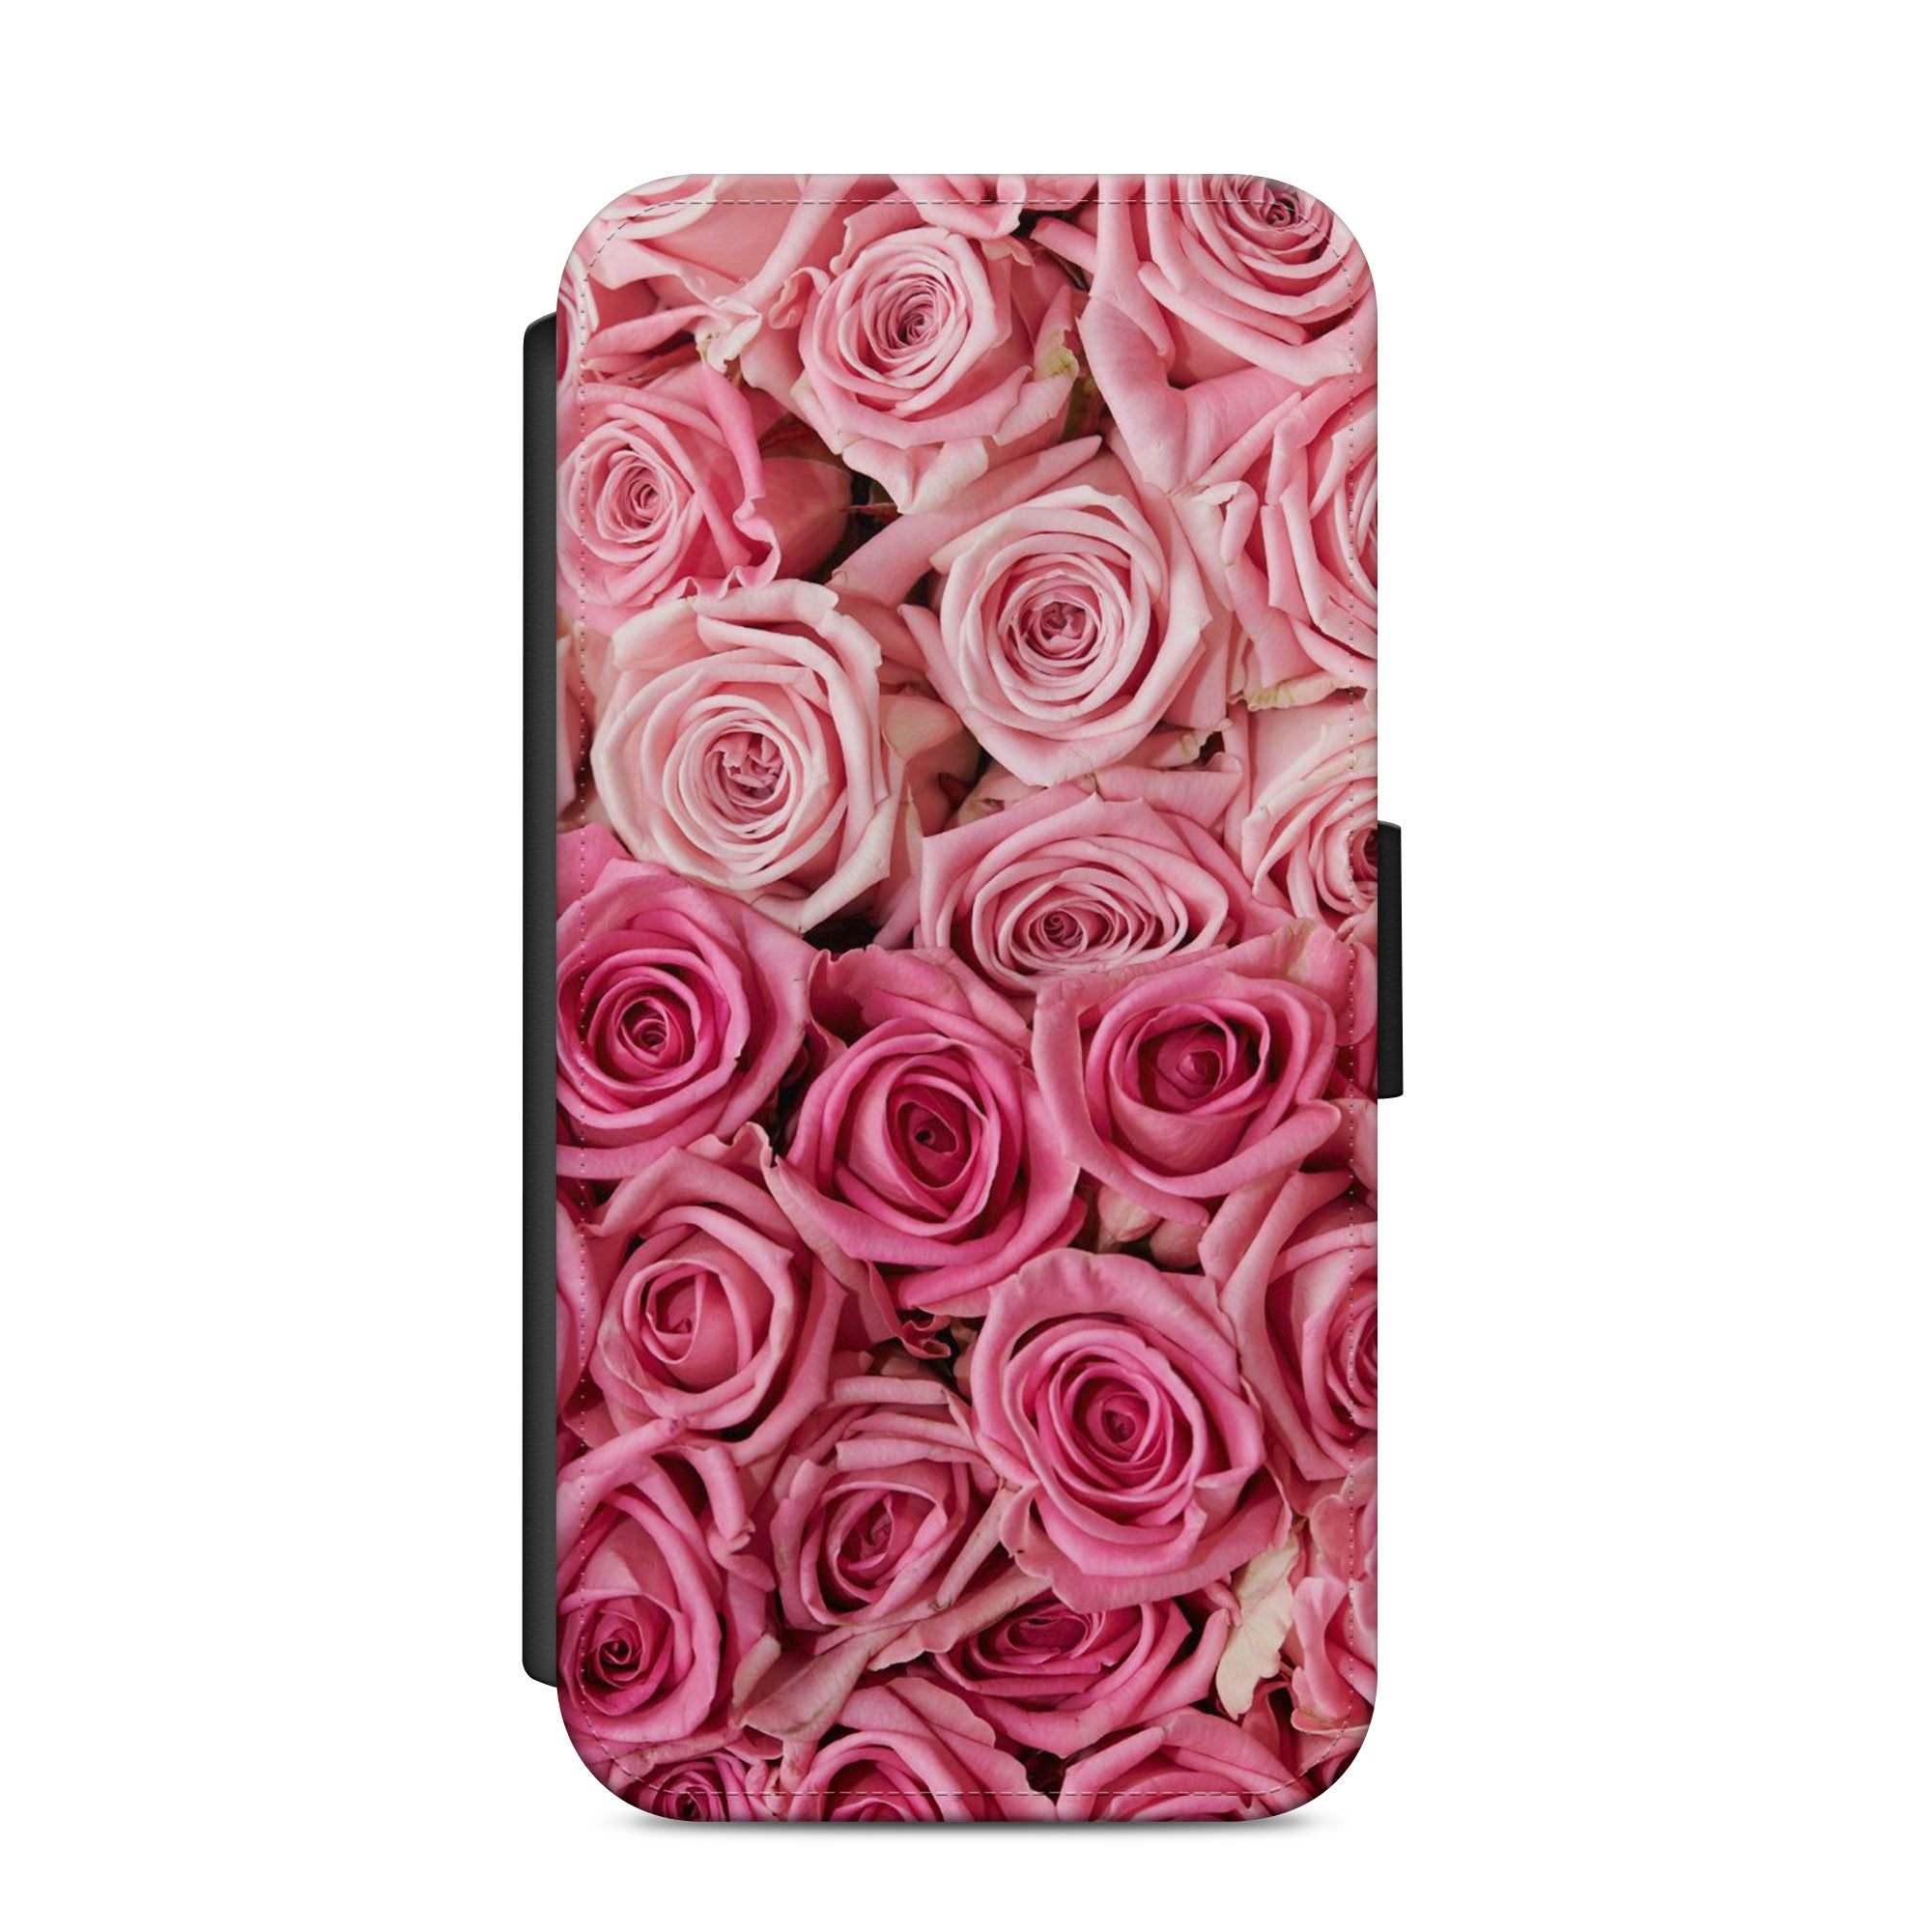 Pink Roses Floral Faux Leather Flip Case Wallet for iPhone / Samsung